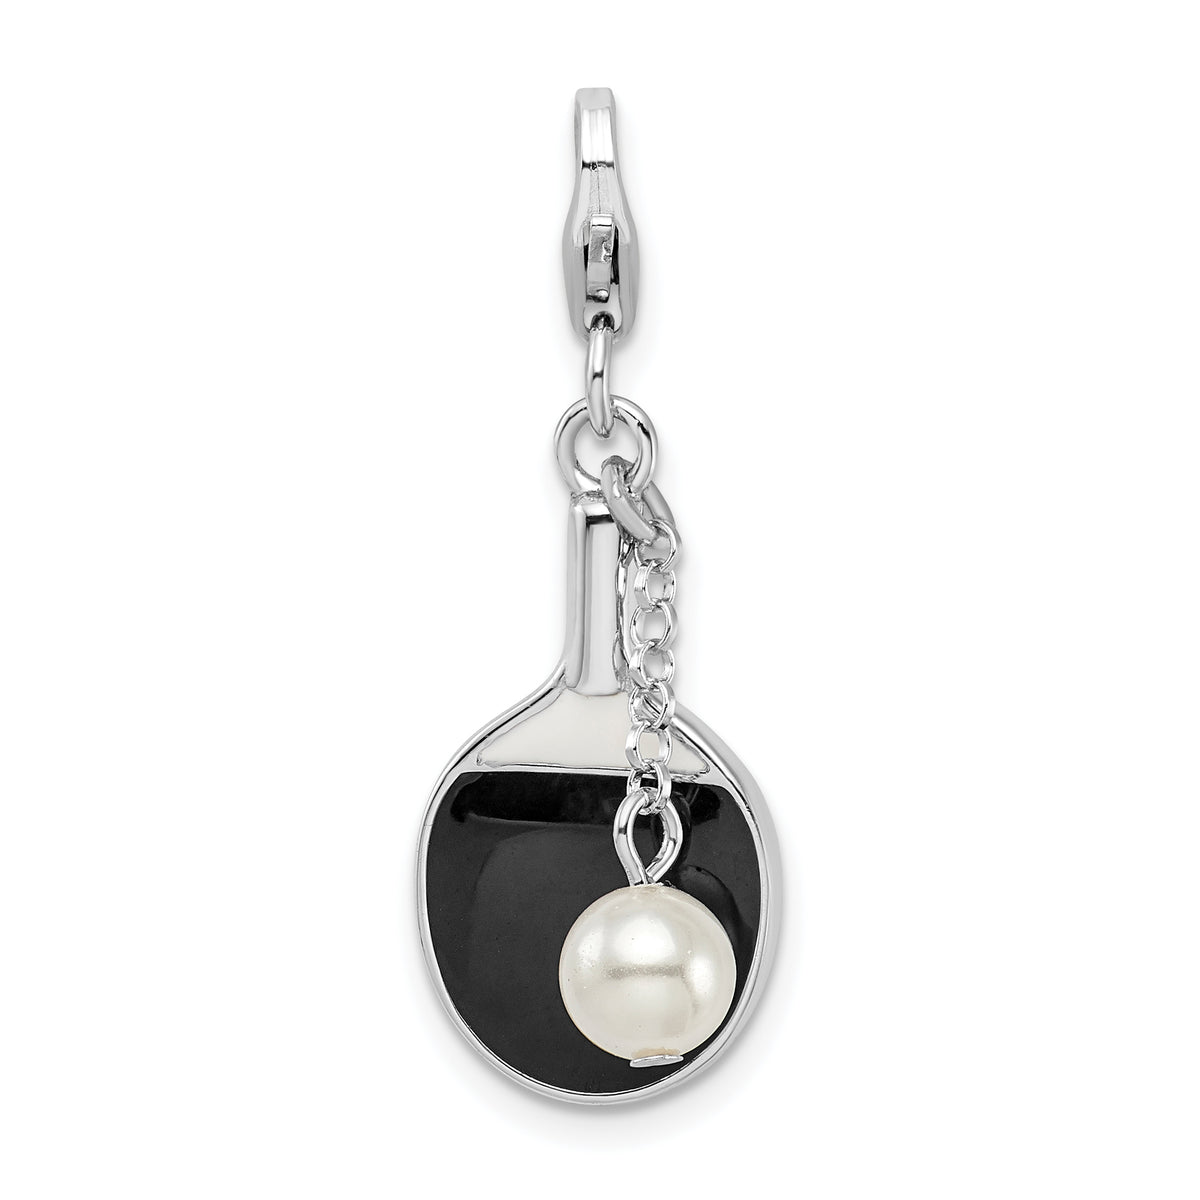 Amore La Vita Sterling Silver Rhodium-plated Polished Moveable Enameled Imitation Pearl Paddle Charm with Fancy Lobster Clasp